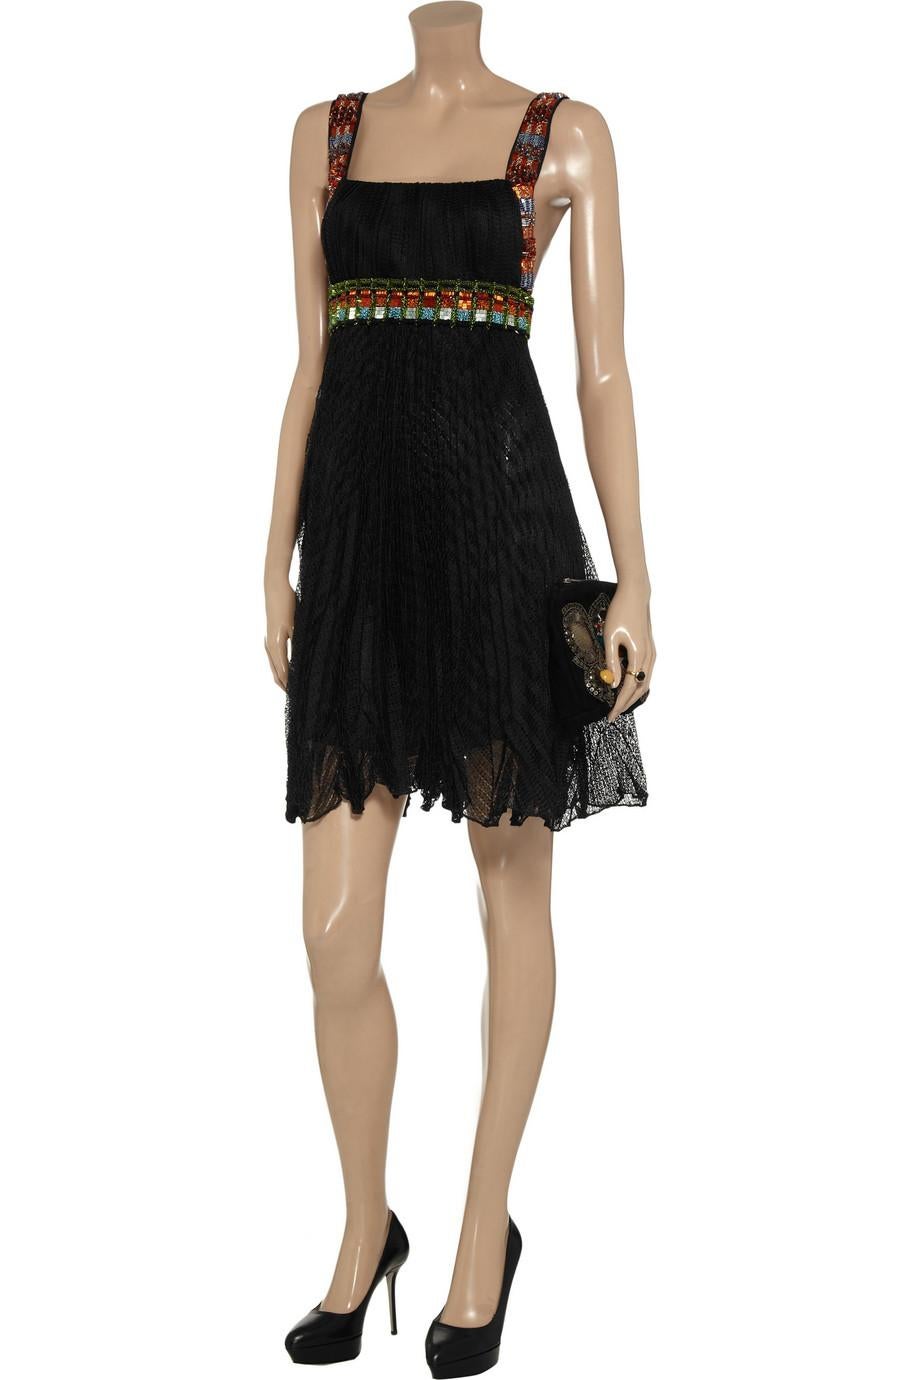 NEW Missoni Black Crochet Knit Dress with Multicolor Beaded Crystal Trimming 42 For Sale 1